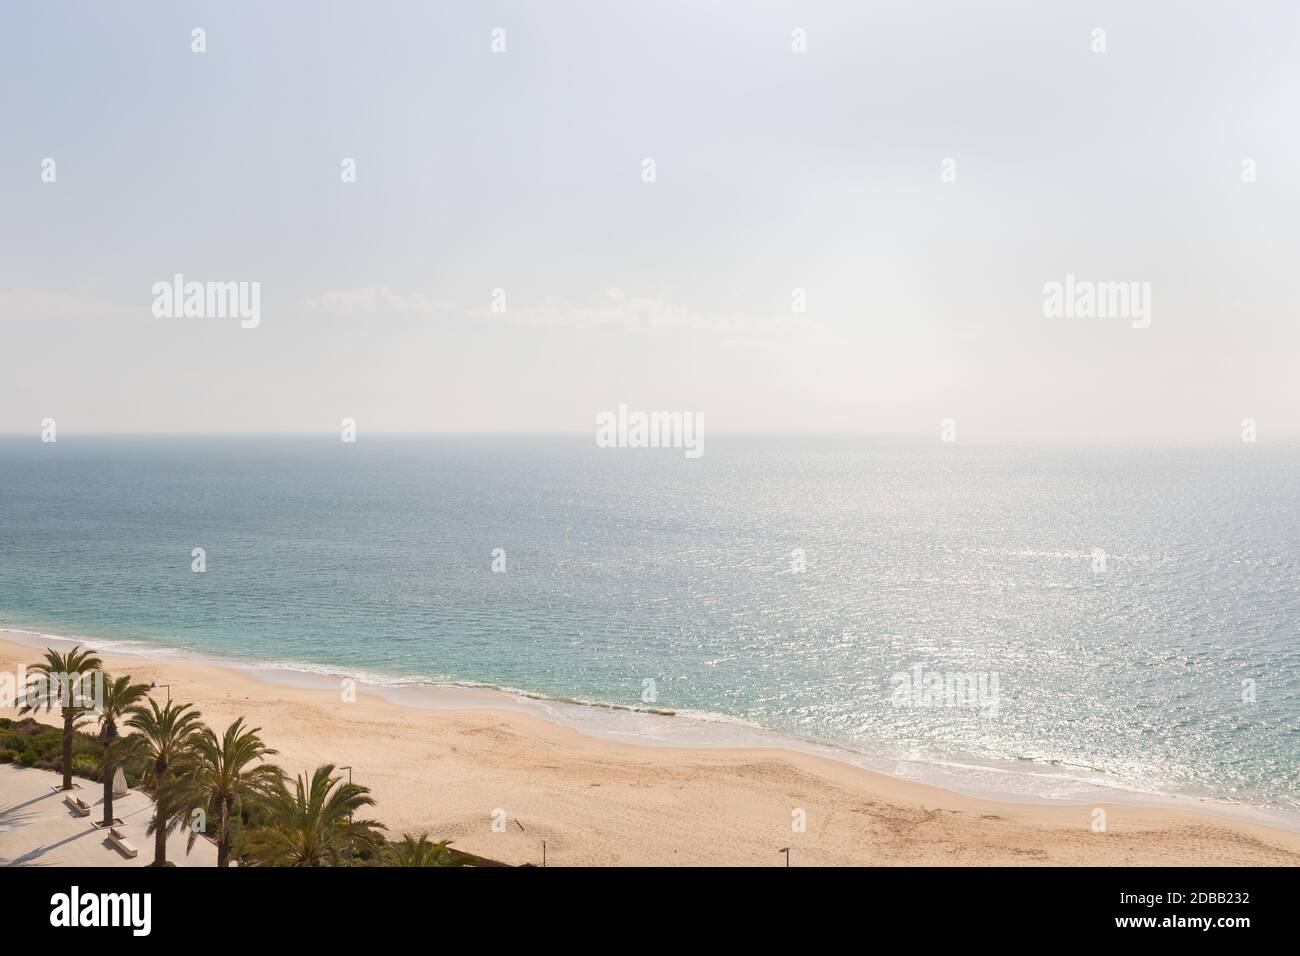 aerial view of Sesimbra beach, Portugal with palm trees and fine sand Stock Photo